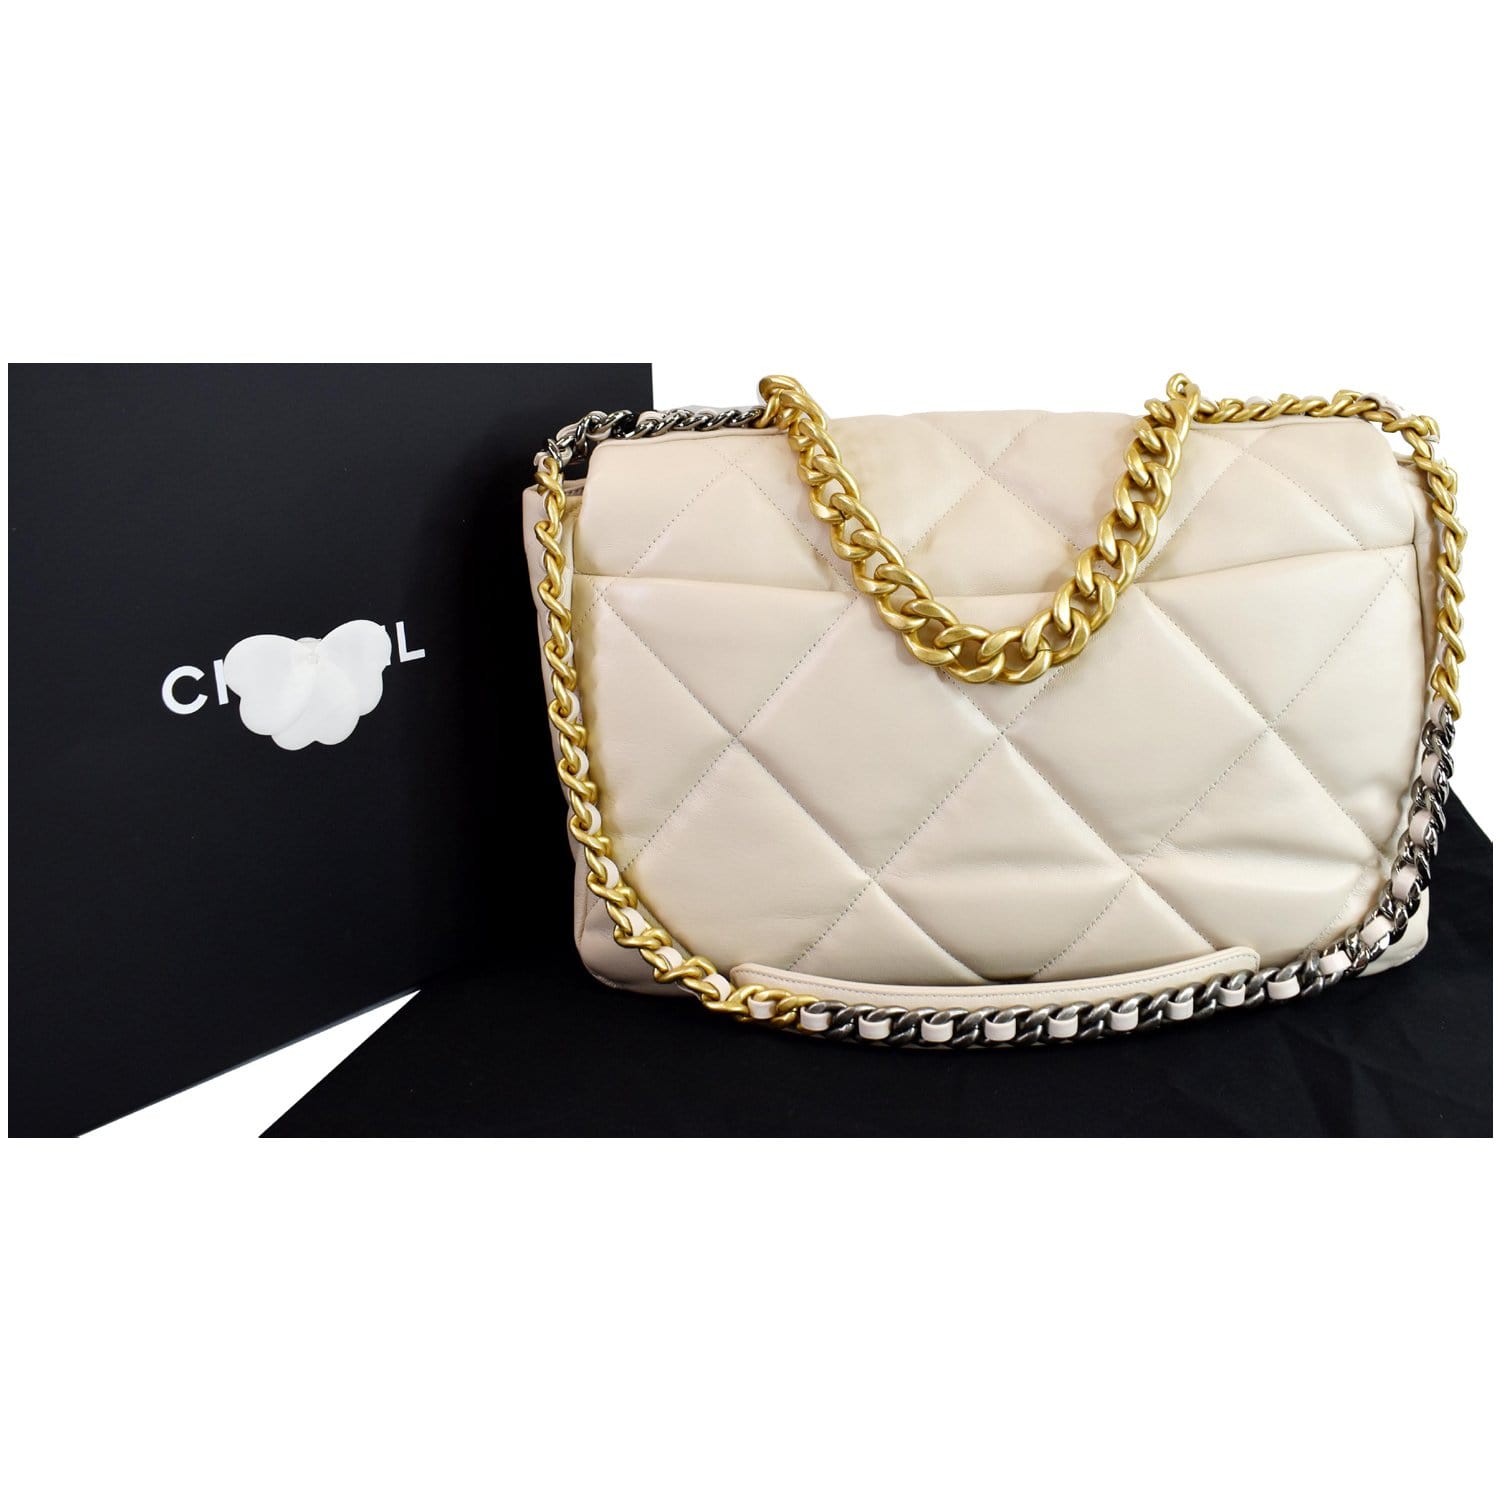 CHANEL, BEIGE LEATHER AND GOLD-TONE METAL CLASSIC SHOULDER BAG, Chanel:  Handbags and Accessories, 2020